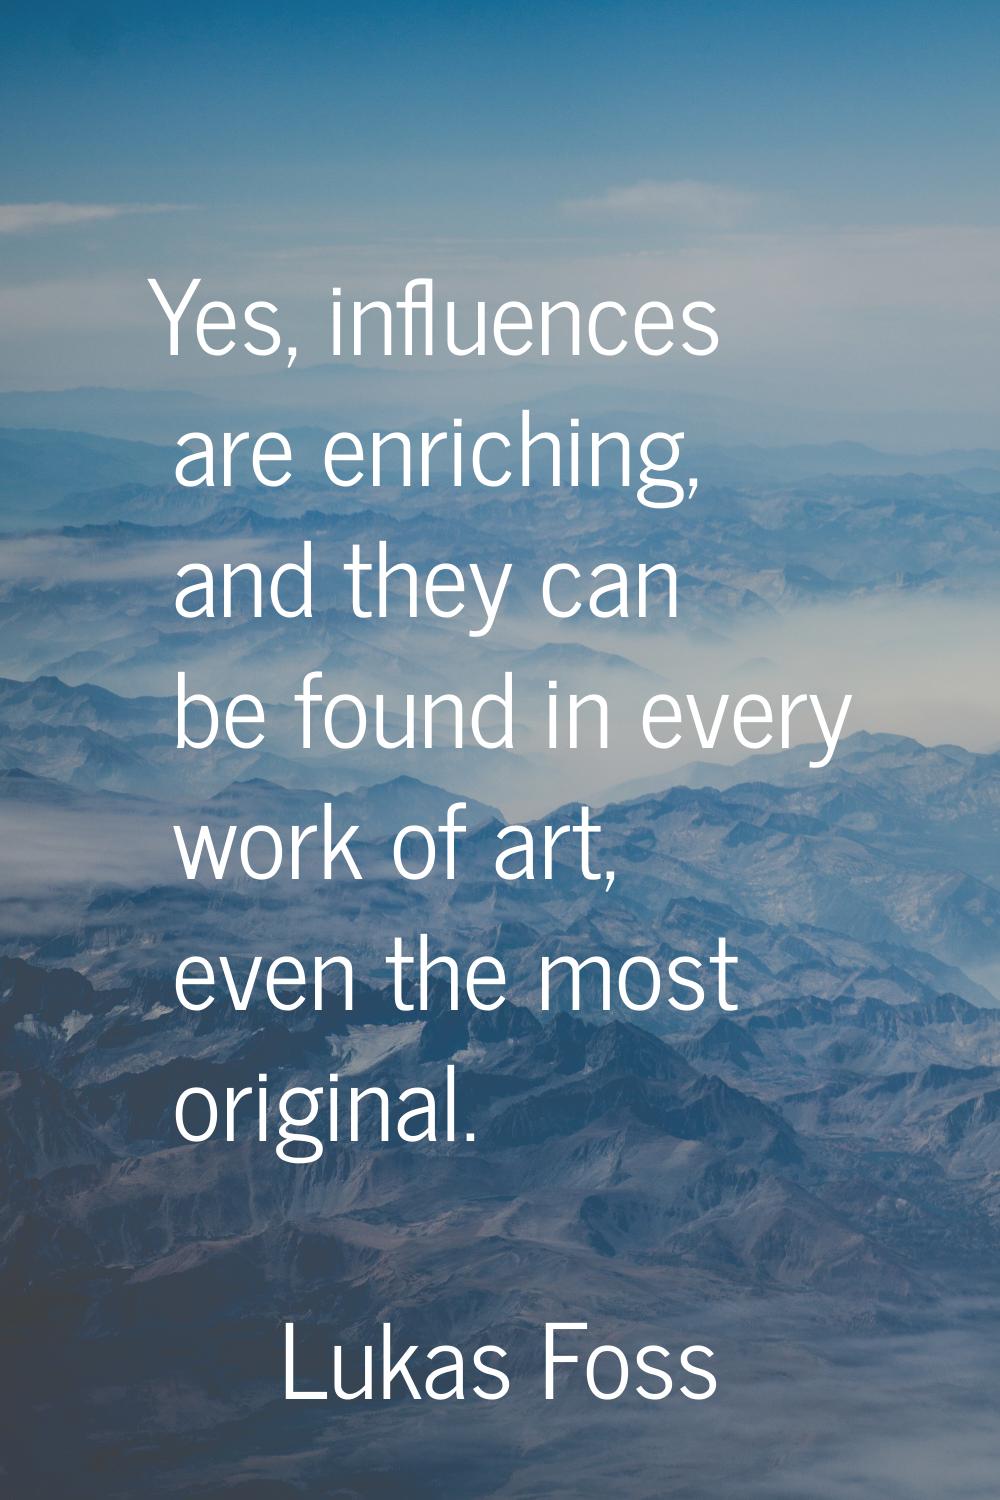 Yes, influences are enriching, and they can be found in every work of art, even the most original.